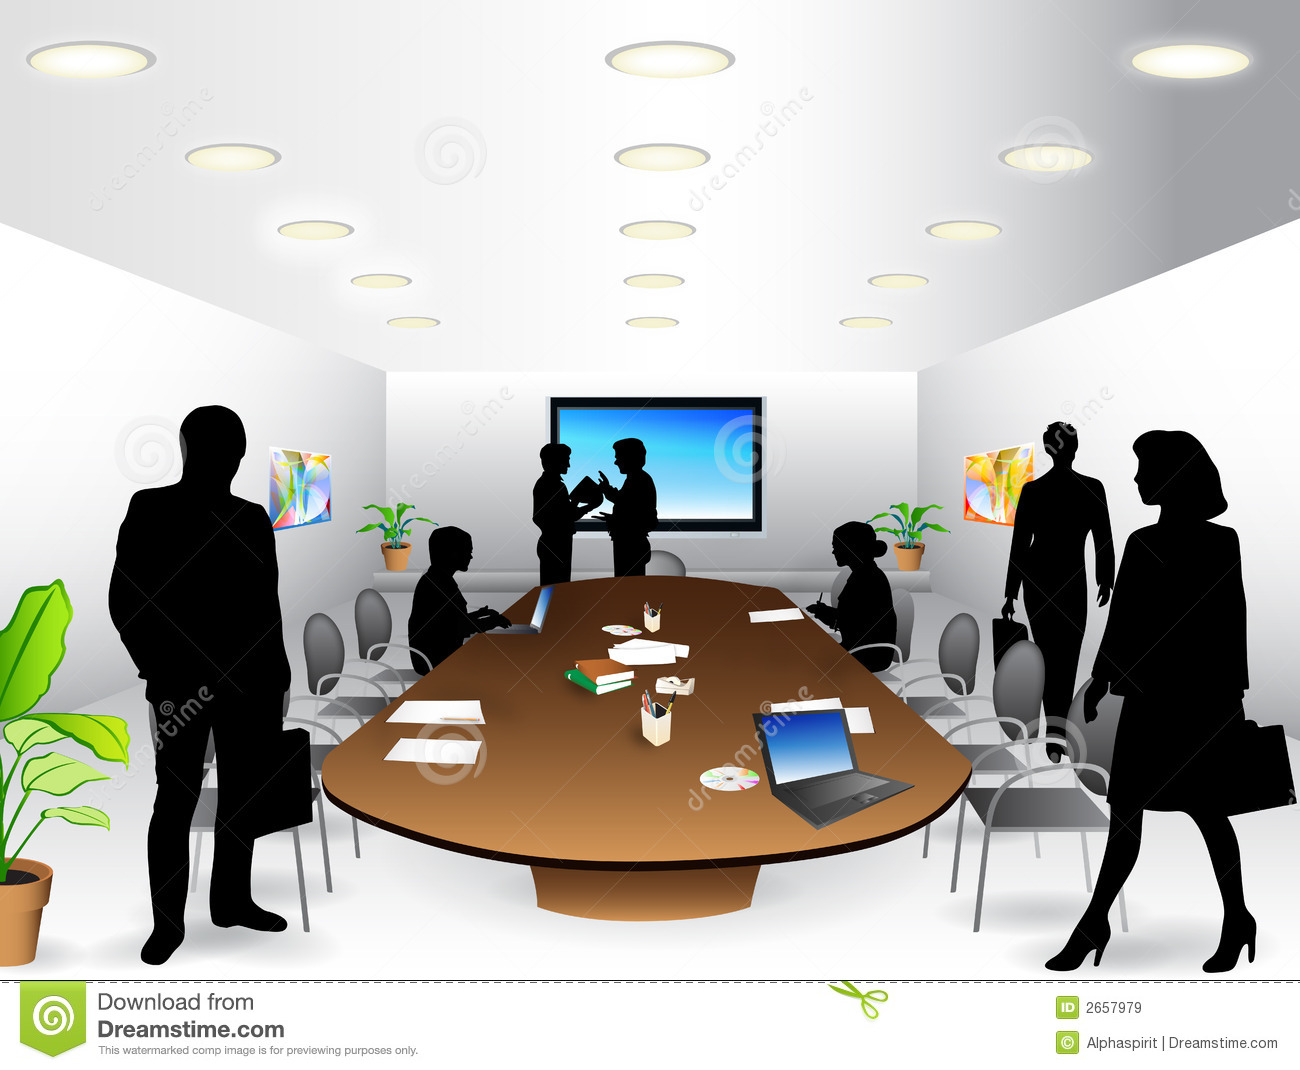 Royalty Free Stock Images  Business Meeting Room